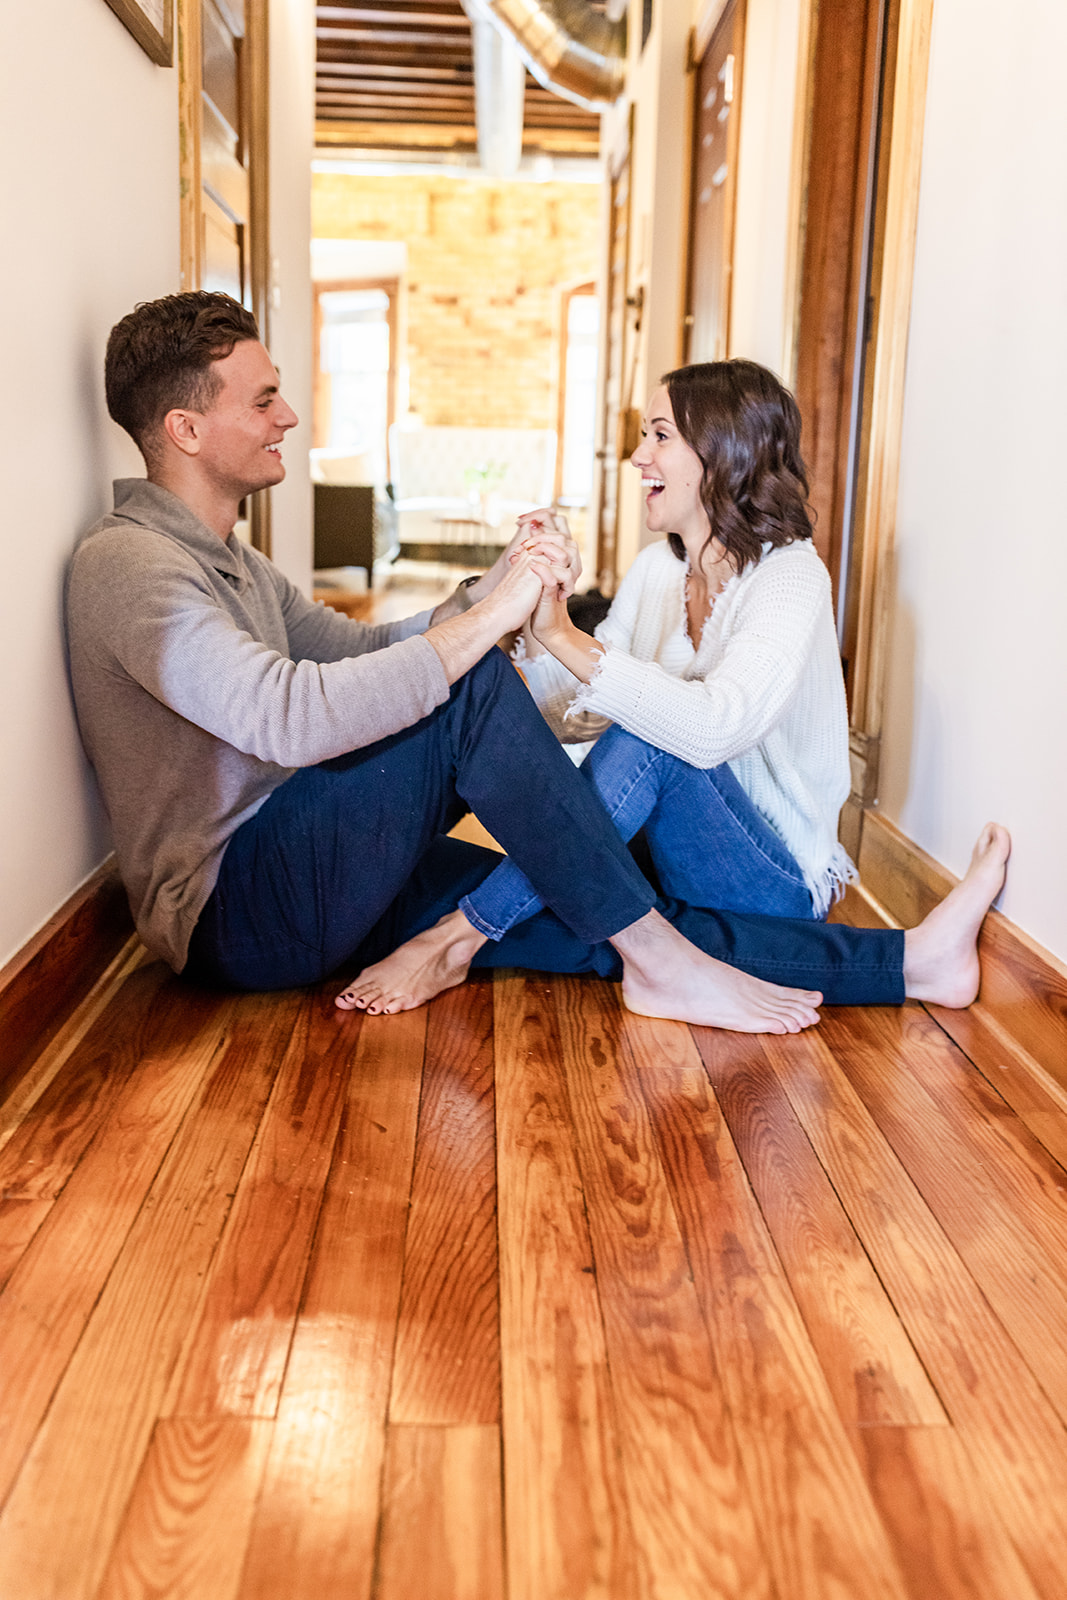 Couple engagement session at home sitting in hallway